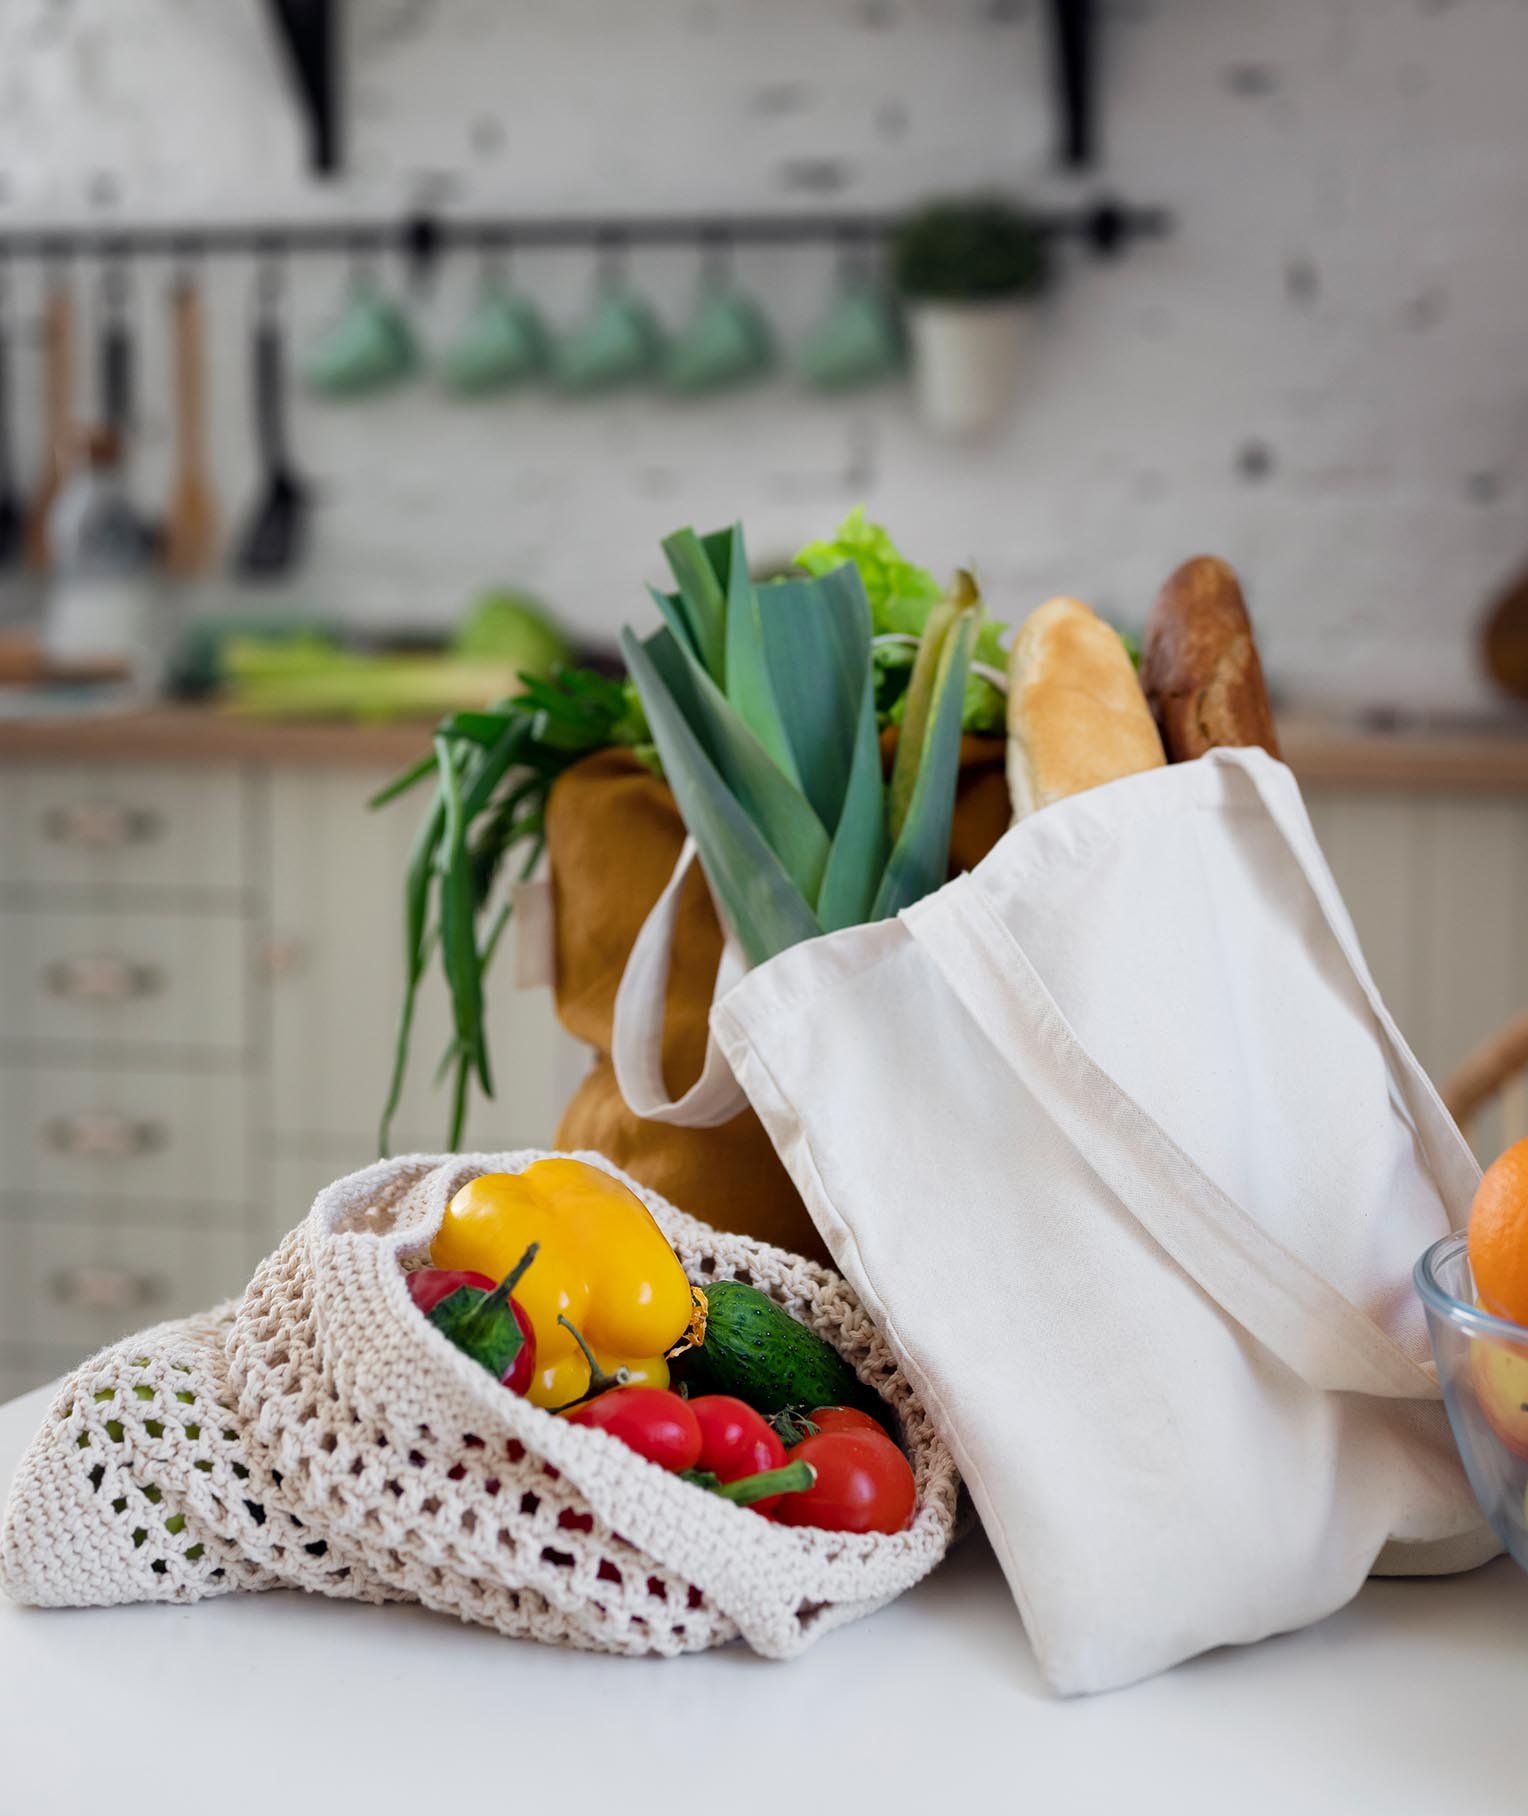 Sustainable Food Shopping: How to Make Eco-Friendly Choices